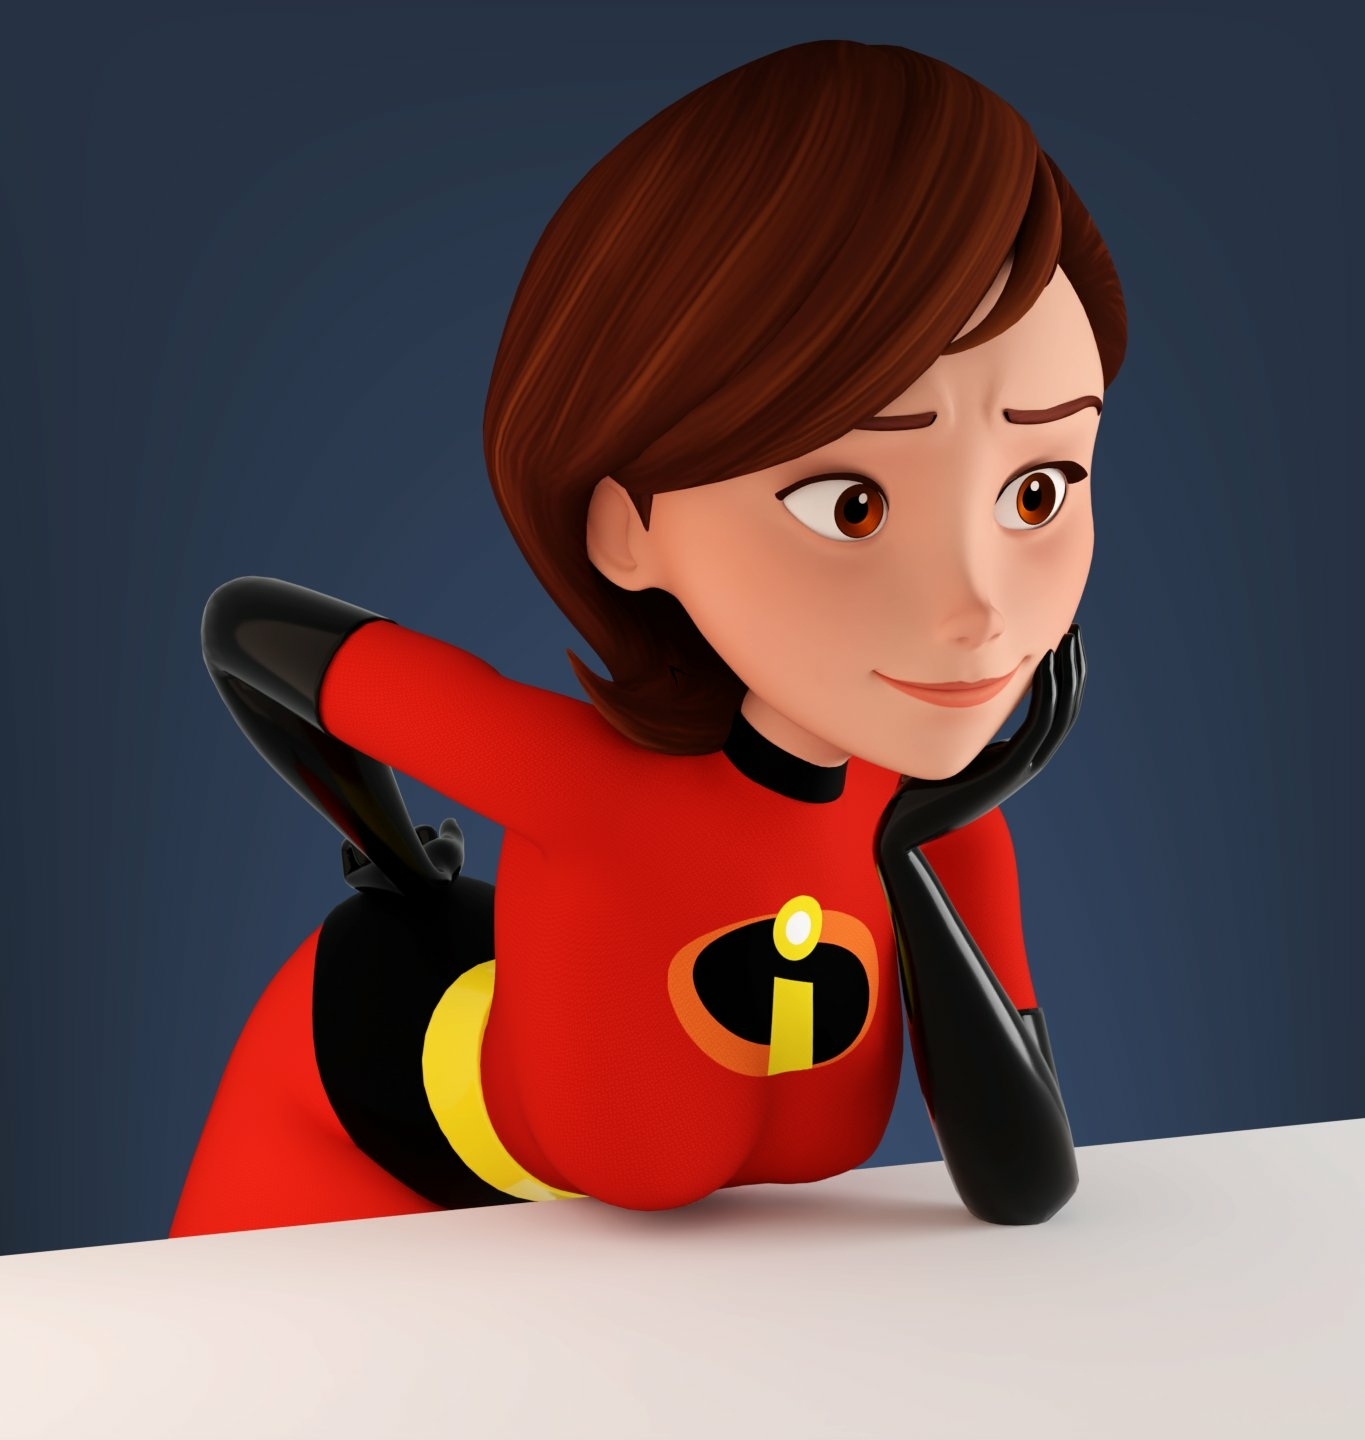 She s hearing all the things you d do to her. Elastigirl The Incredibles Ass Cake Boobs Big boobs Big Ass Big Tits Horny Face Horny Sexy 3d Porn